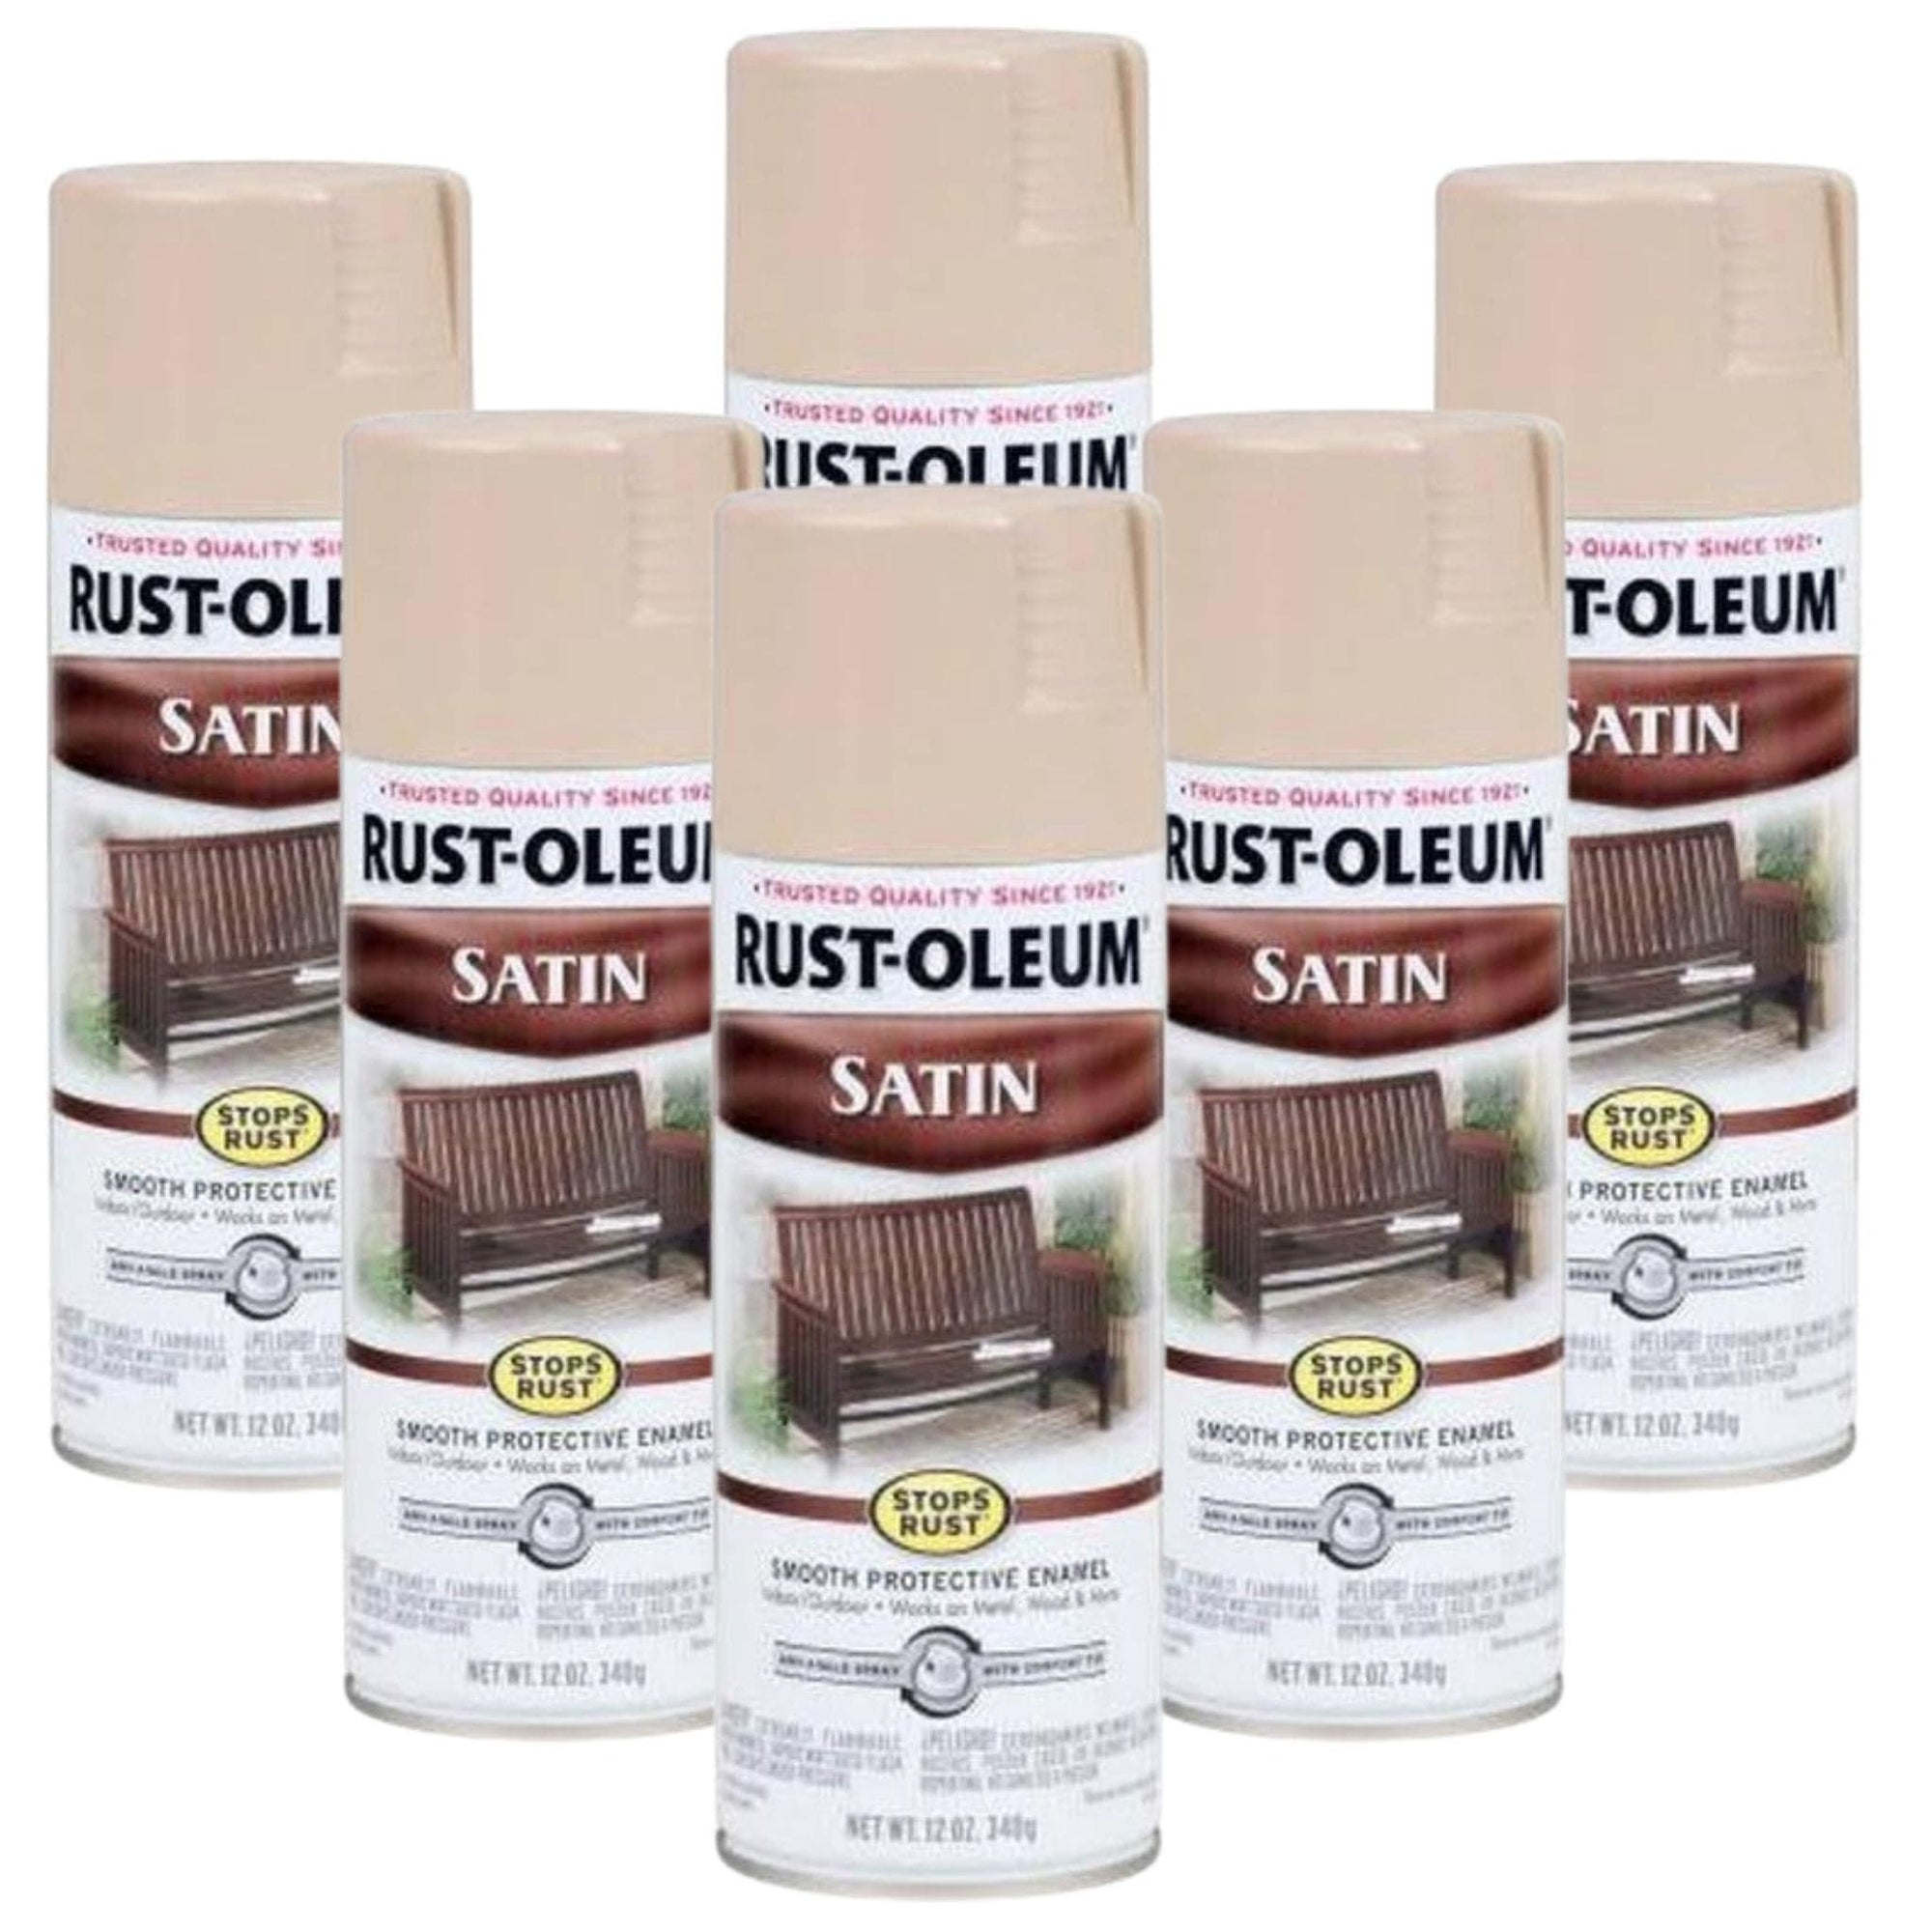 Rustoleum Stops Rust Spray Paint - Satin French Beige (6 Cans) - South East Clearance Centre